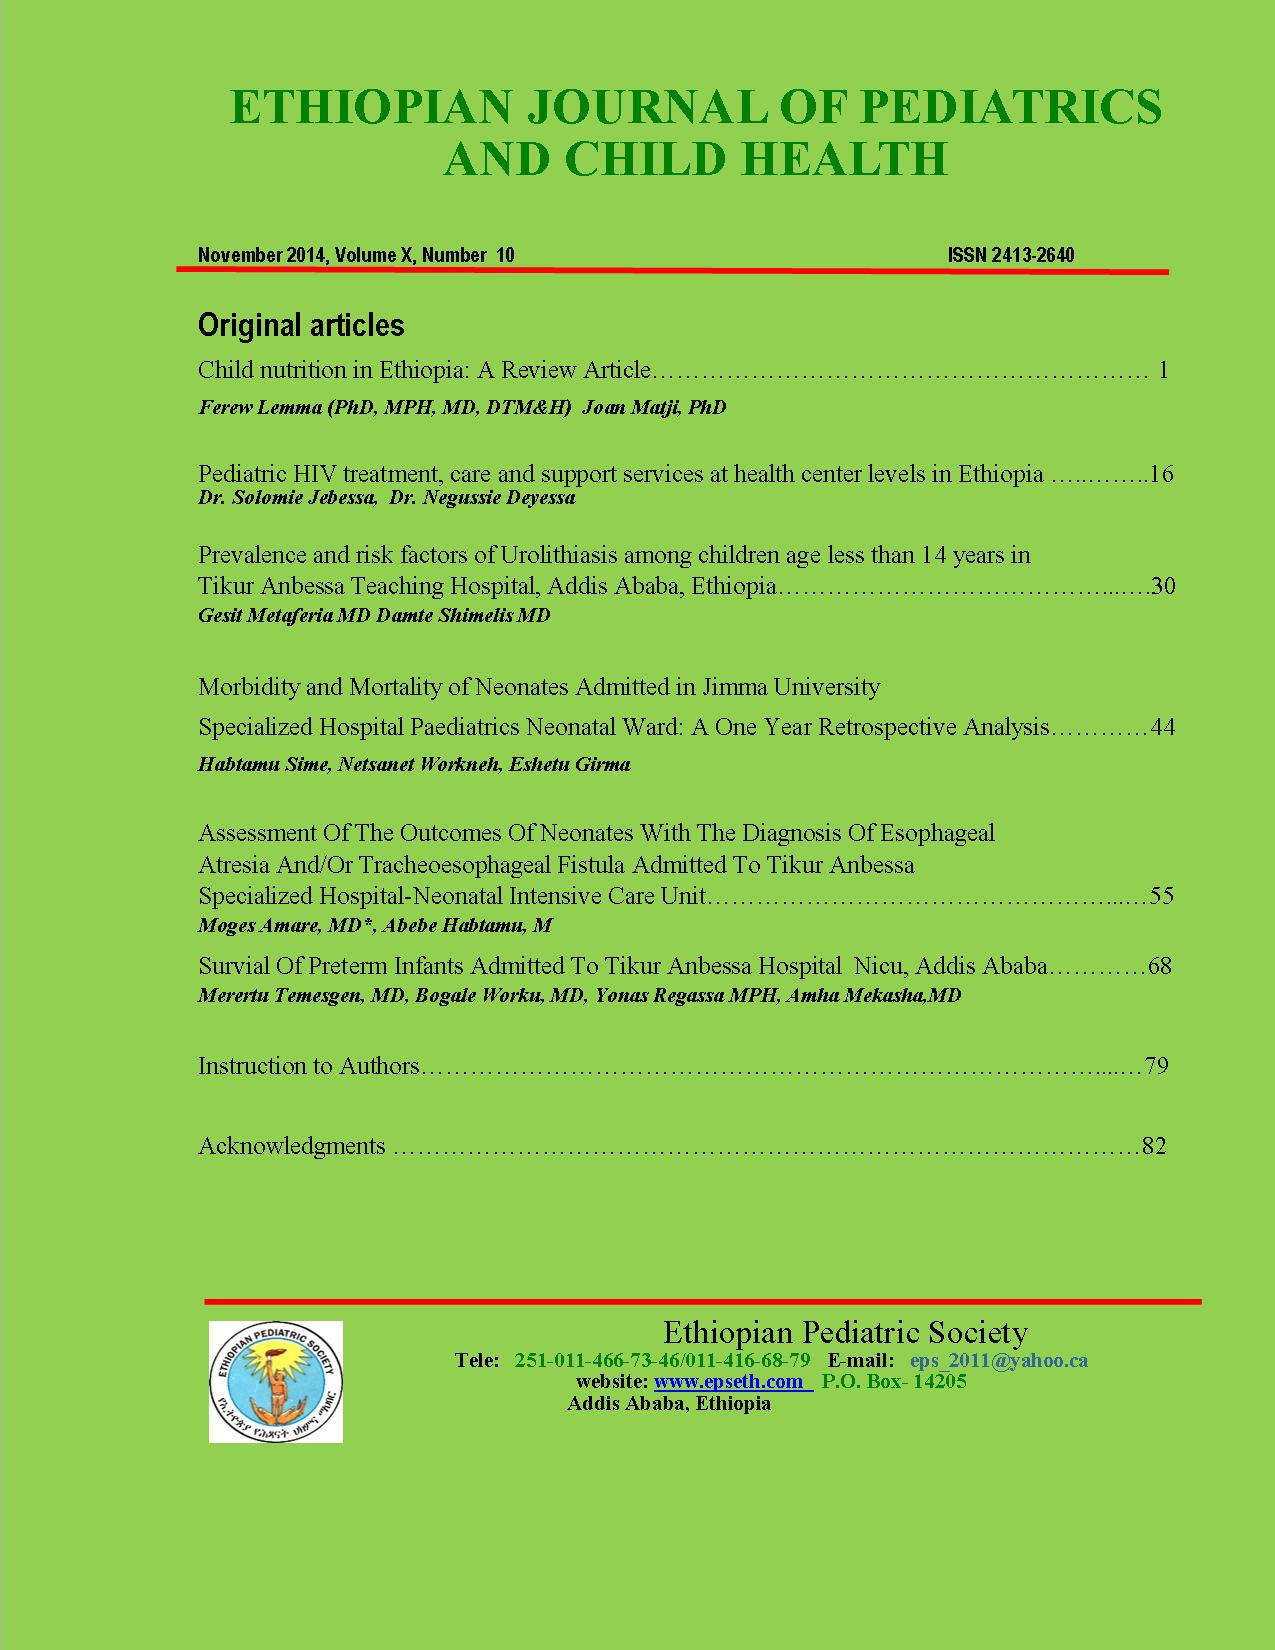 EJPCH August 2015 Issue